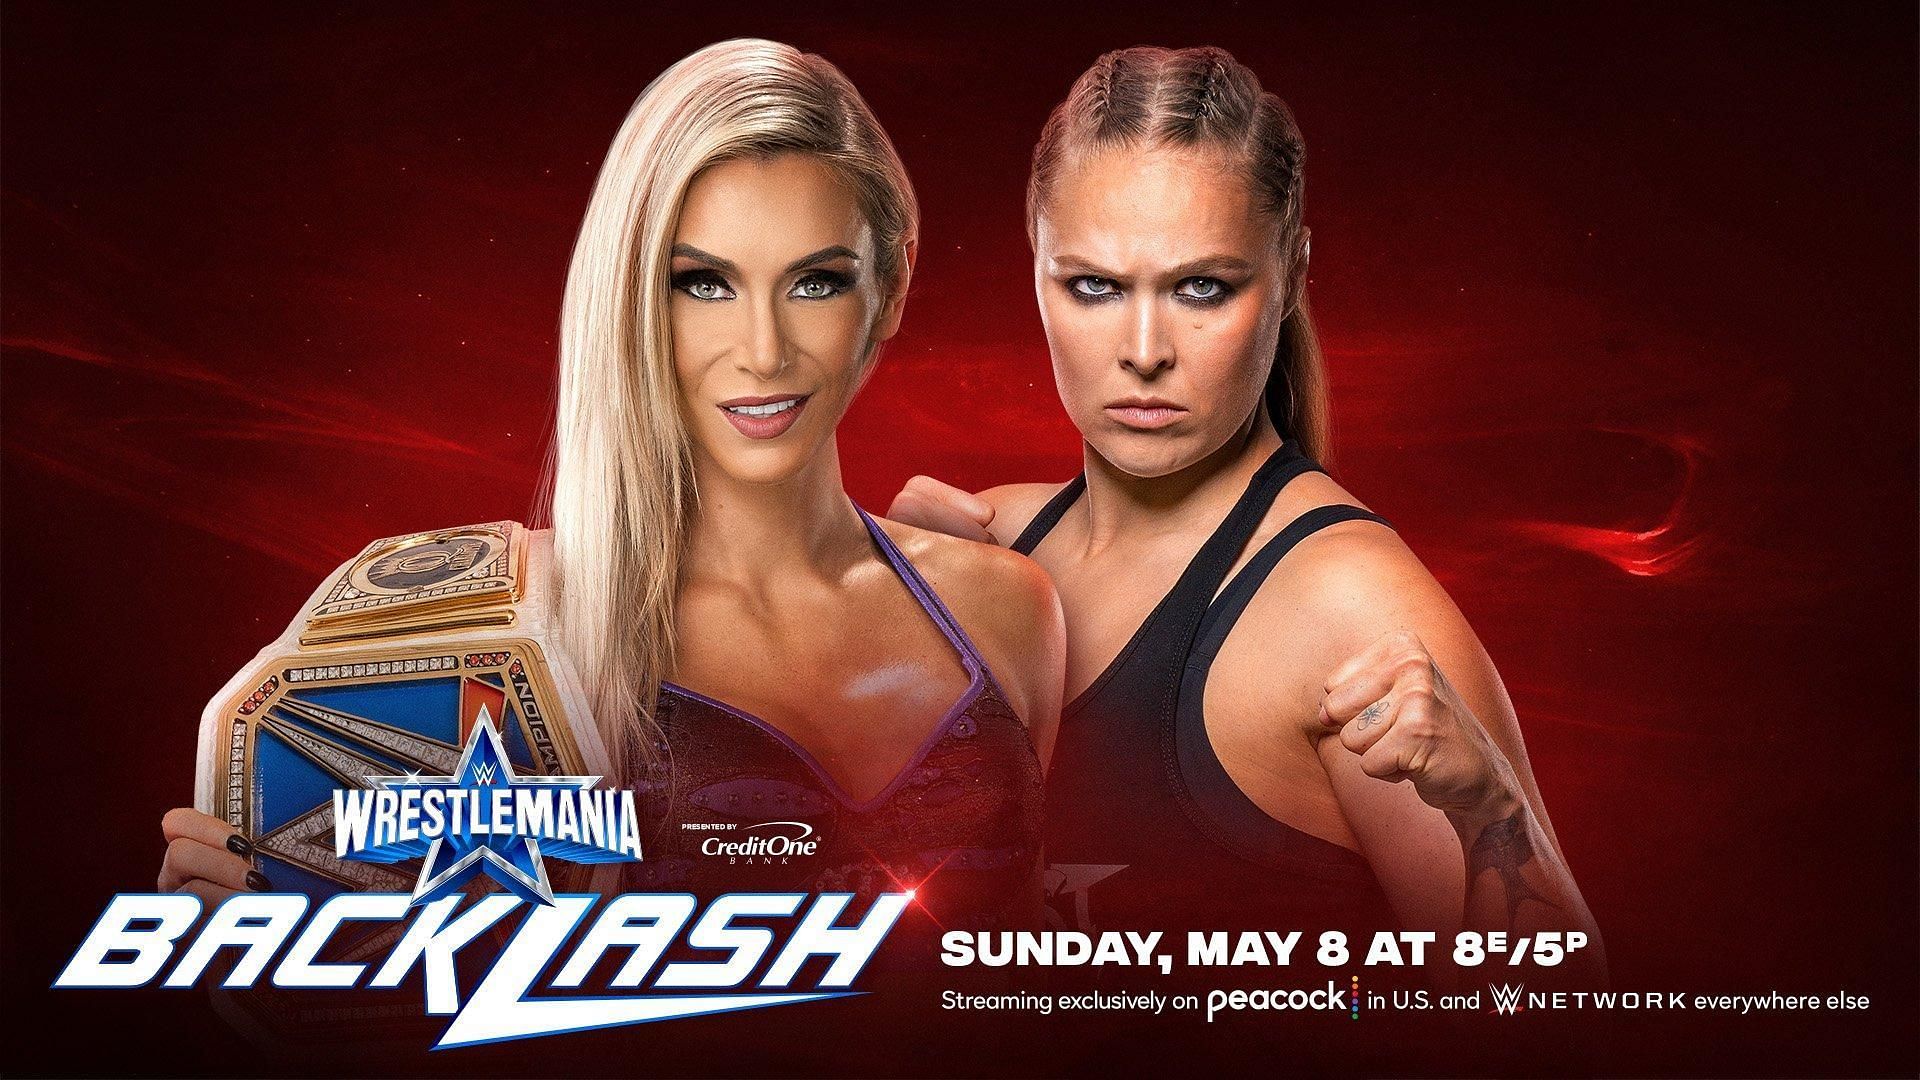 Charlotte Flair and Ronda Rousey will have a WrestleMania rematch at WrestleMania Backlash